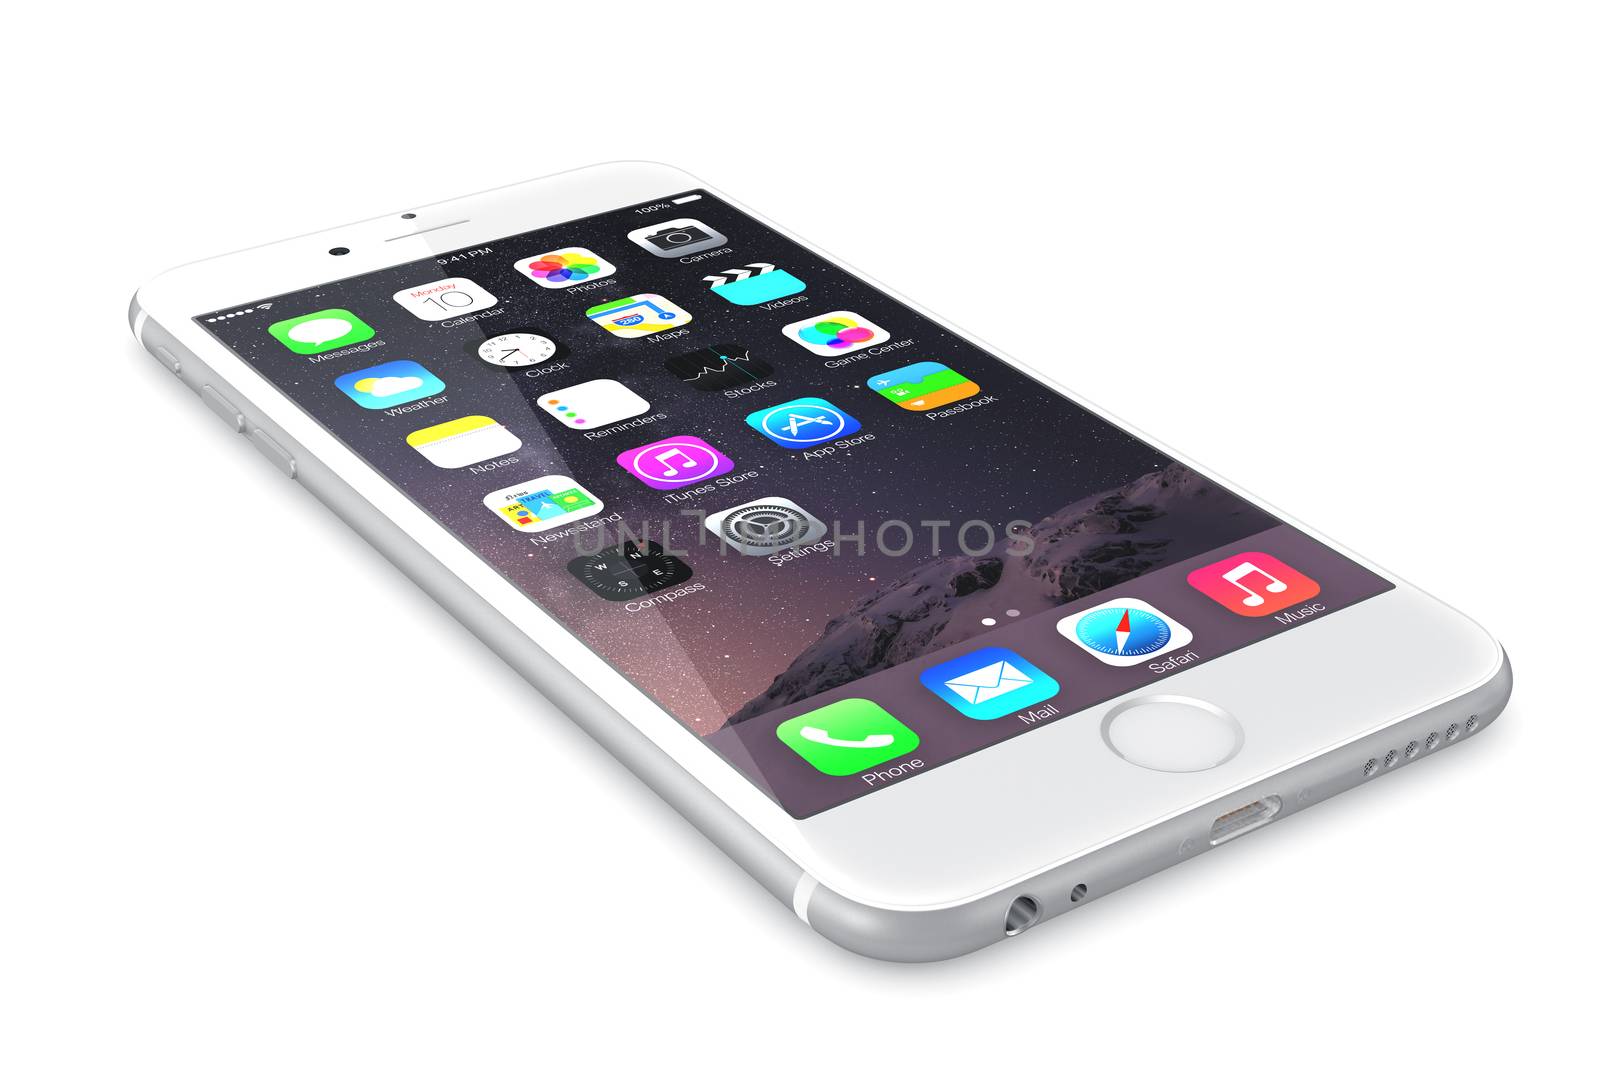 Galati, Romania - September 18, 2014: Apple Silver iPhone 6 Plus showing the home screen with iOS 8.The new iPhone with higher-resolution 4.7 and 5.5-inch screens, improved cameras, new sensors, a dedicated NFC chip for mobile payments. Apple released the iPhone 6 and iPhone 6 Plus on September 9, 2014.